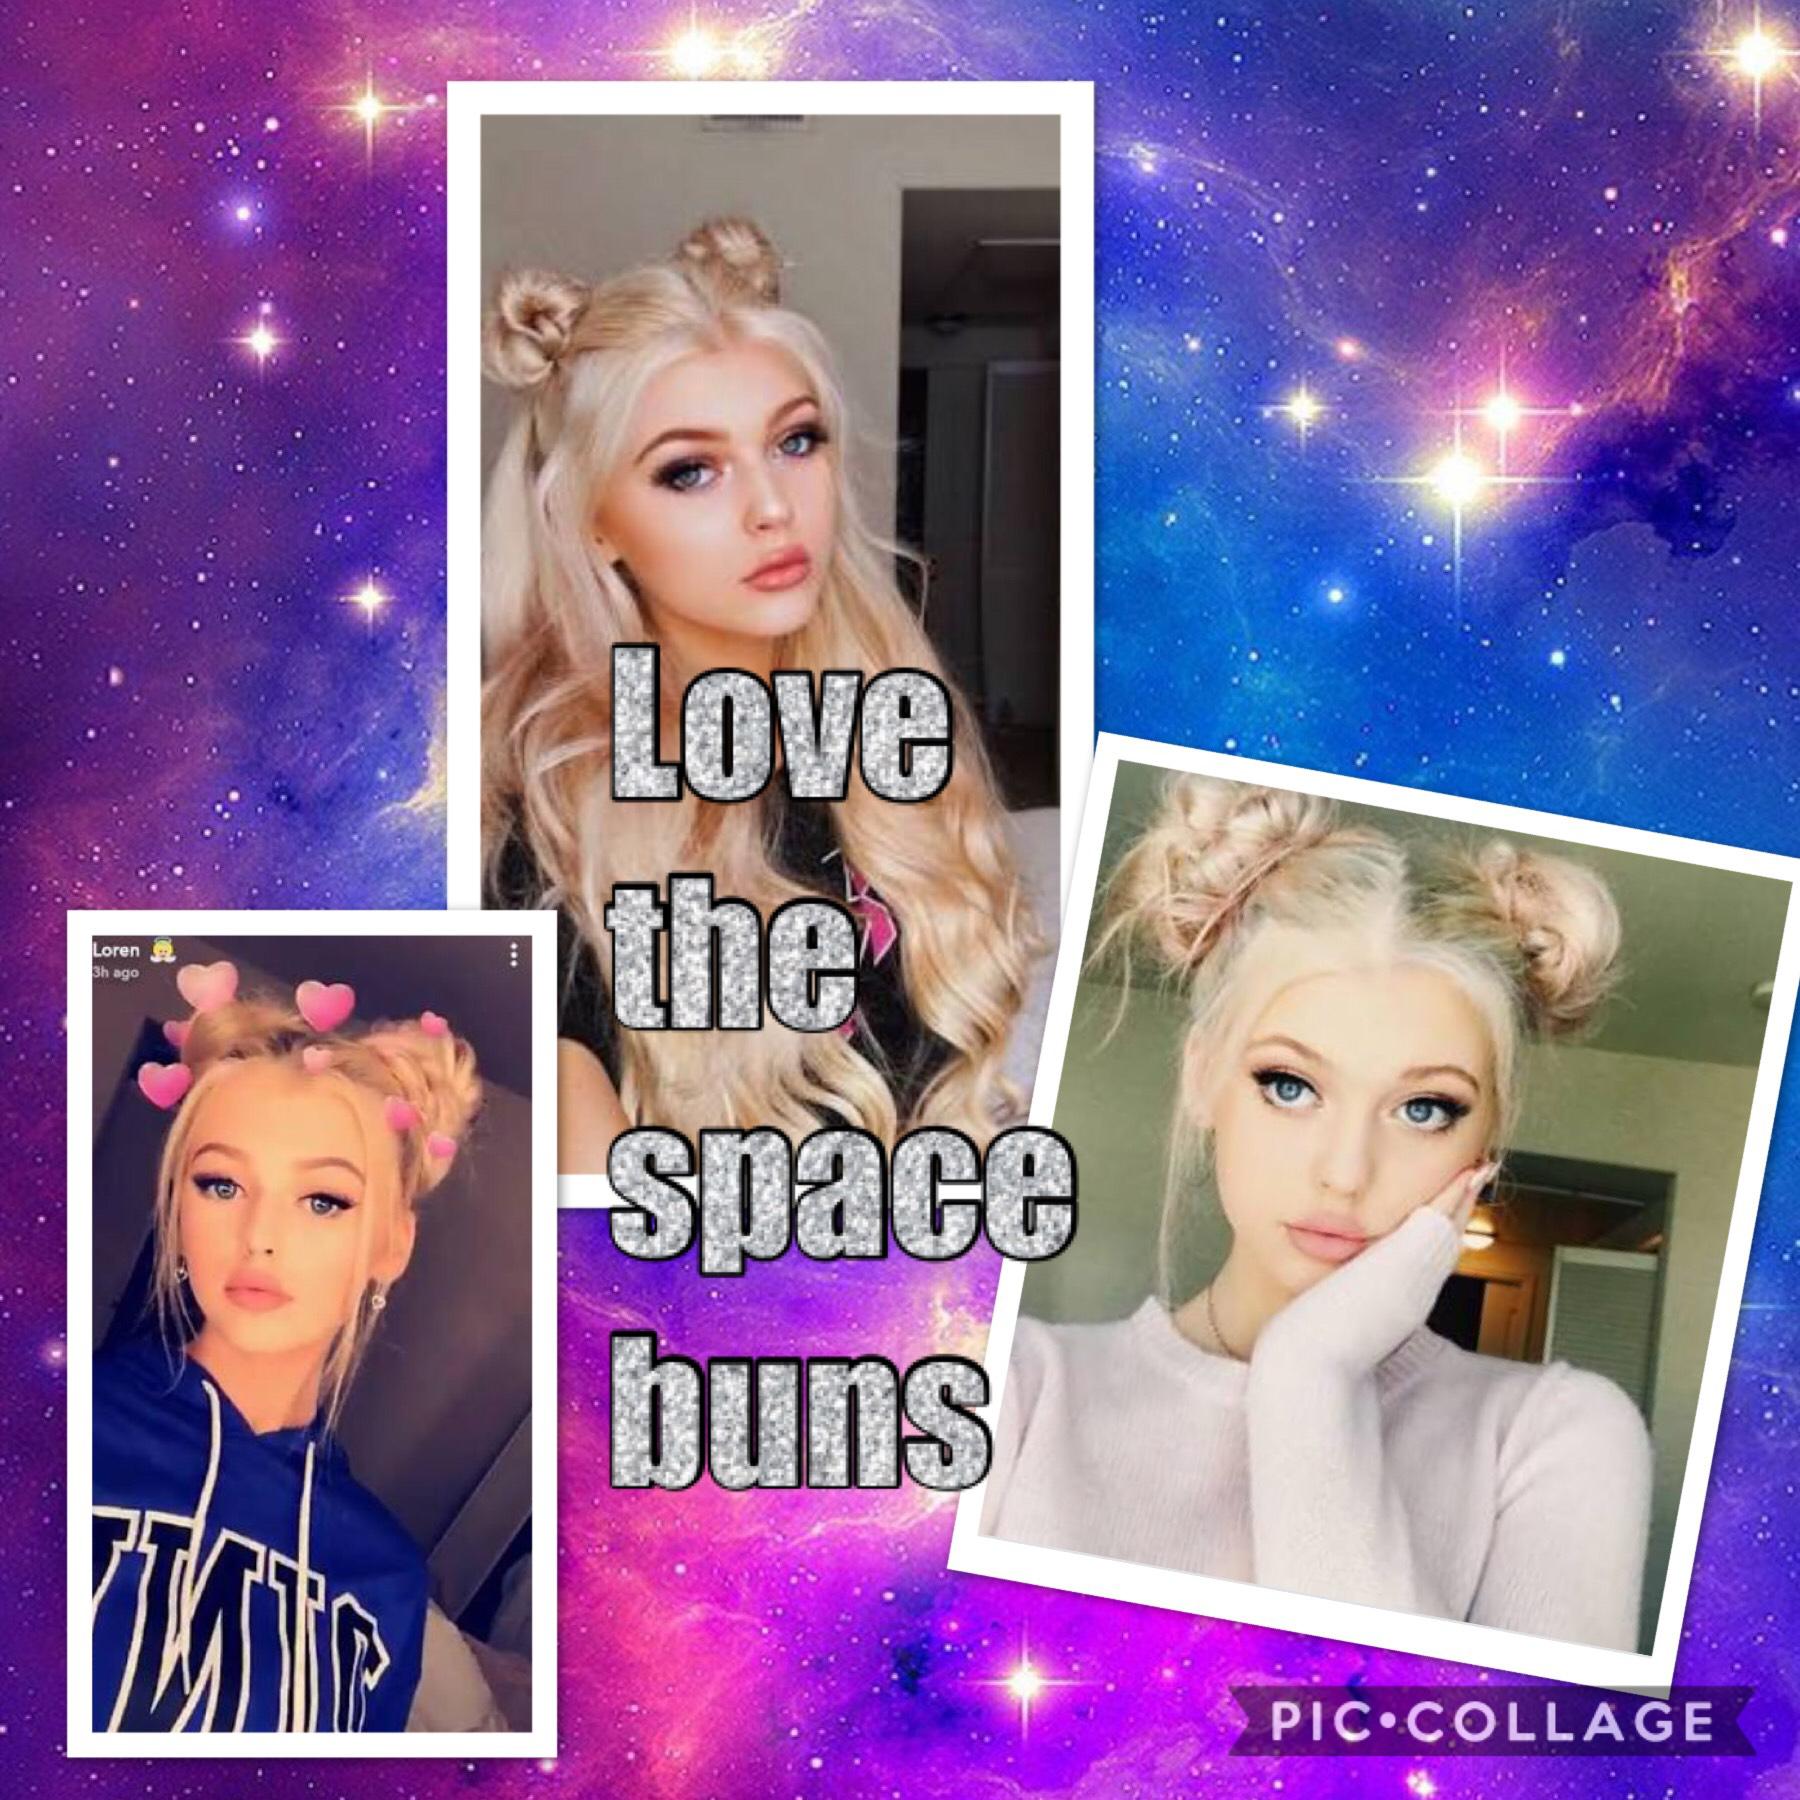 Comment if you love her space buns 